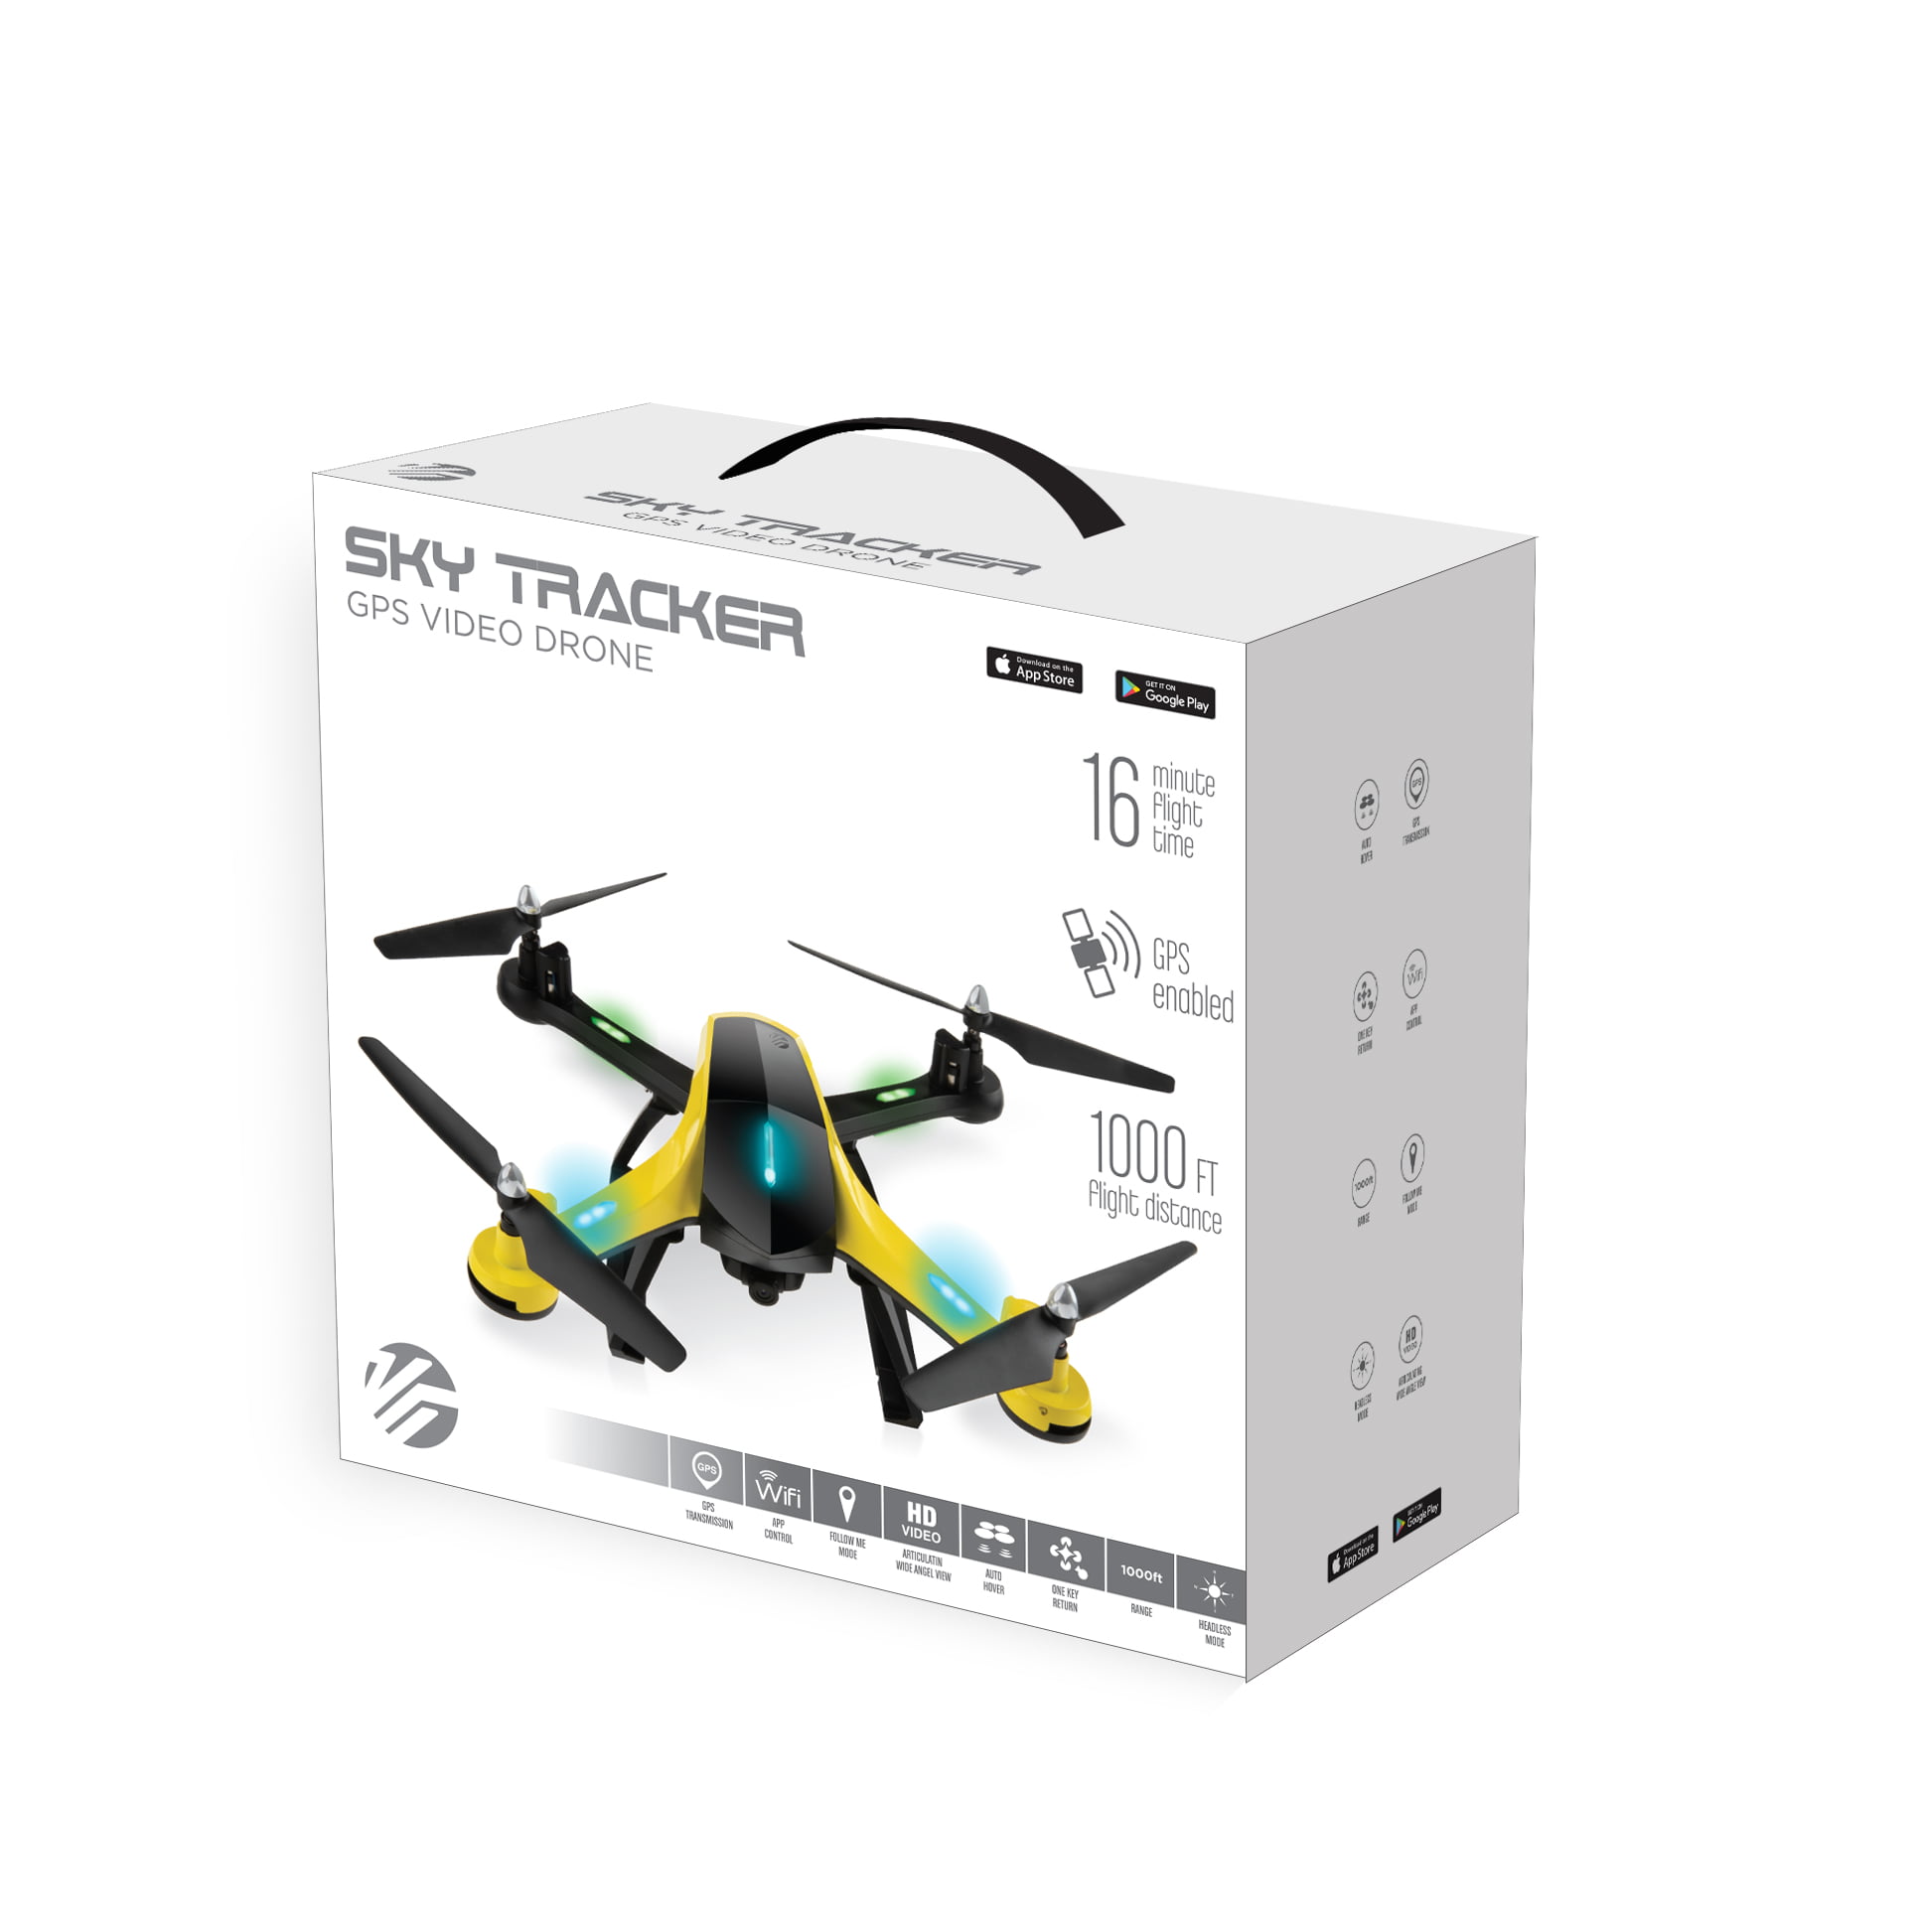 Vivitar DRC445 VTi Sky Tracker Camera Video Drone With GPS and WiFi for sale online 